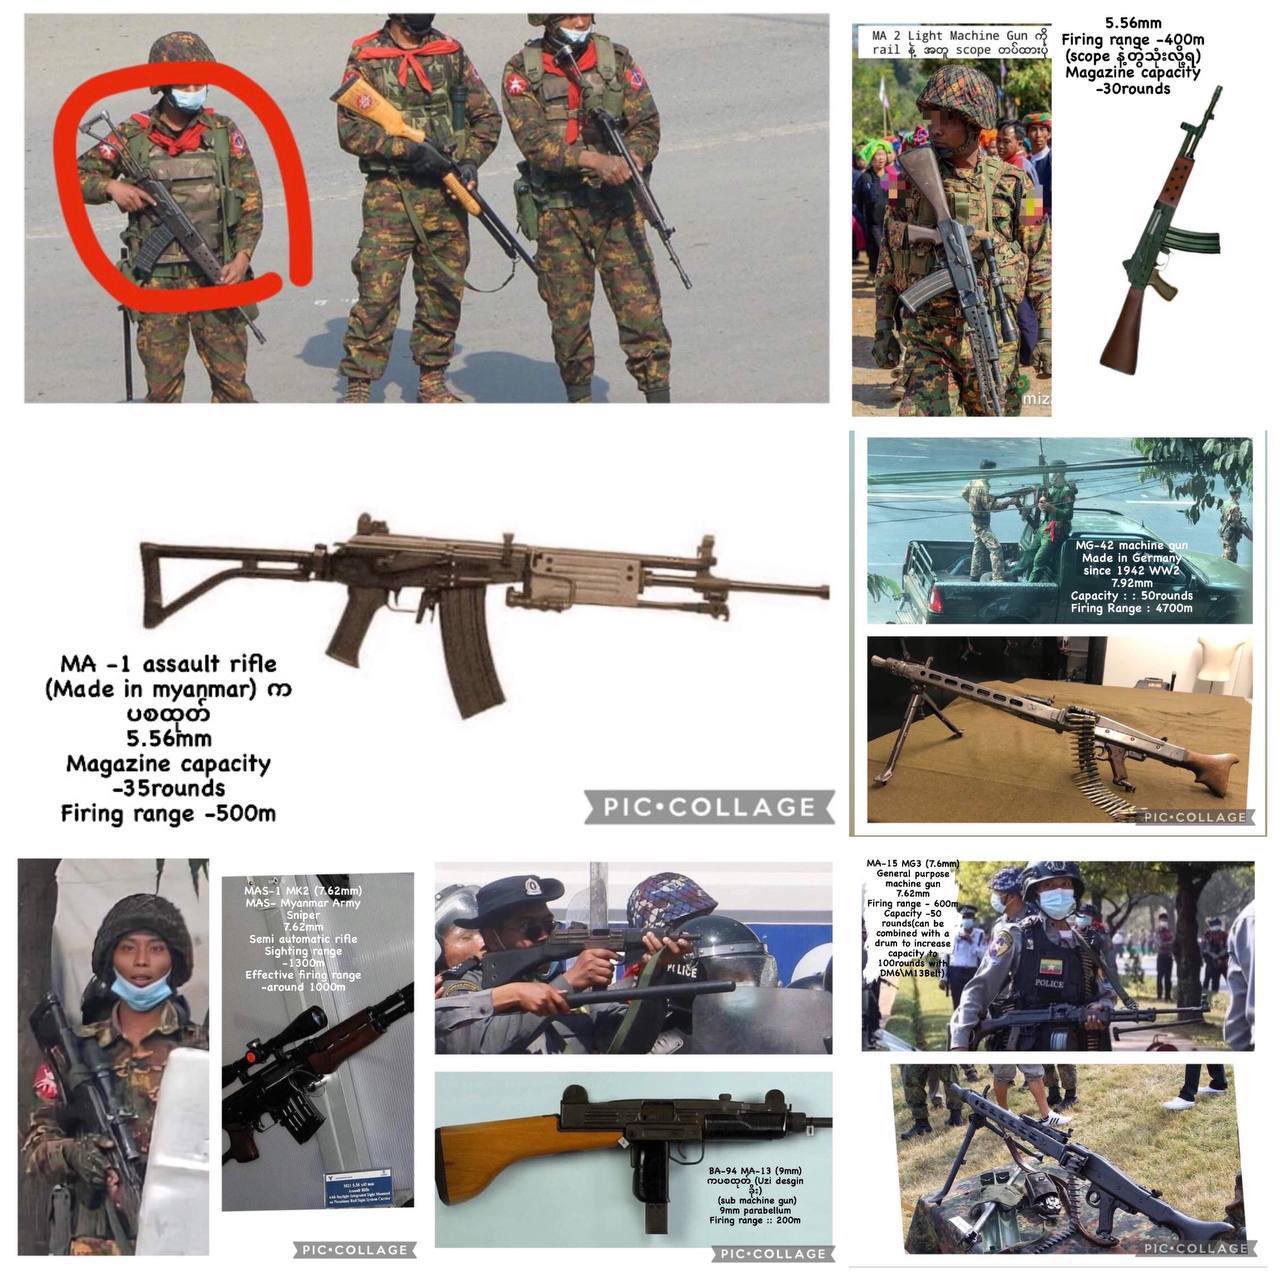 Ayeayesann Here Are The Evidences Of Military Terrorists In Myanmar Using Such Lethal Weapons And Bullets Which Are Banned Even In Wars Under Hague Declaration And Geneva Convention Do They Need This